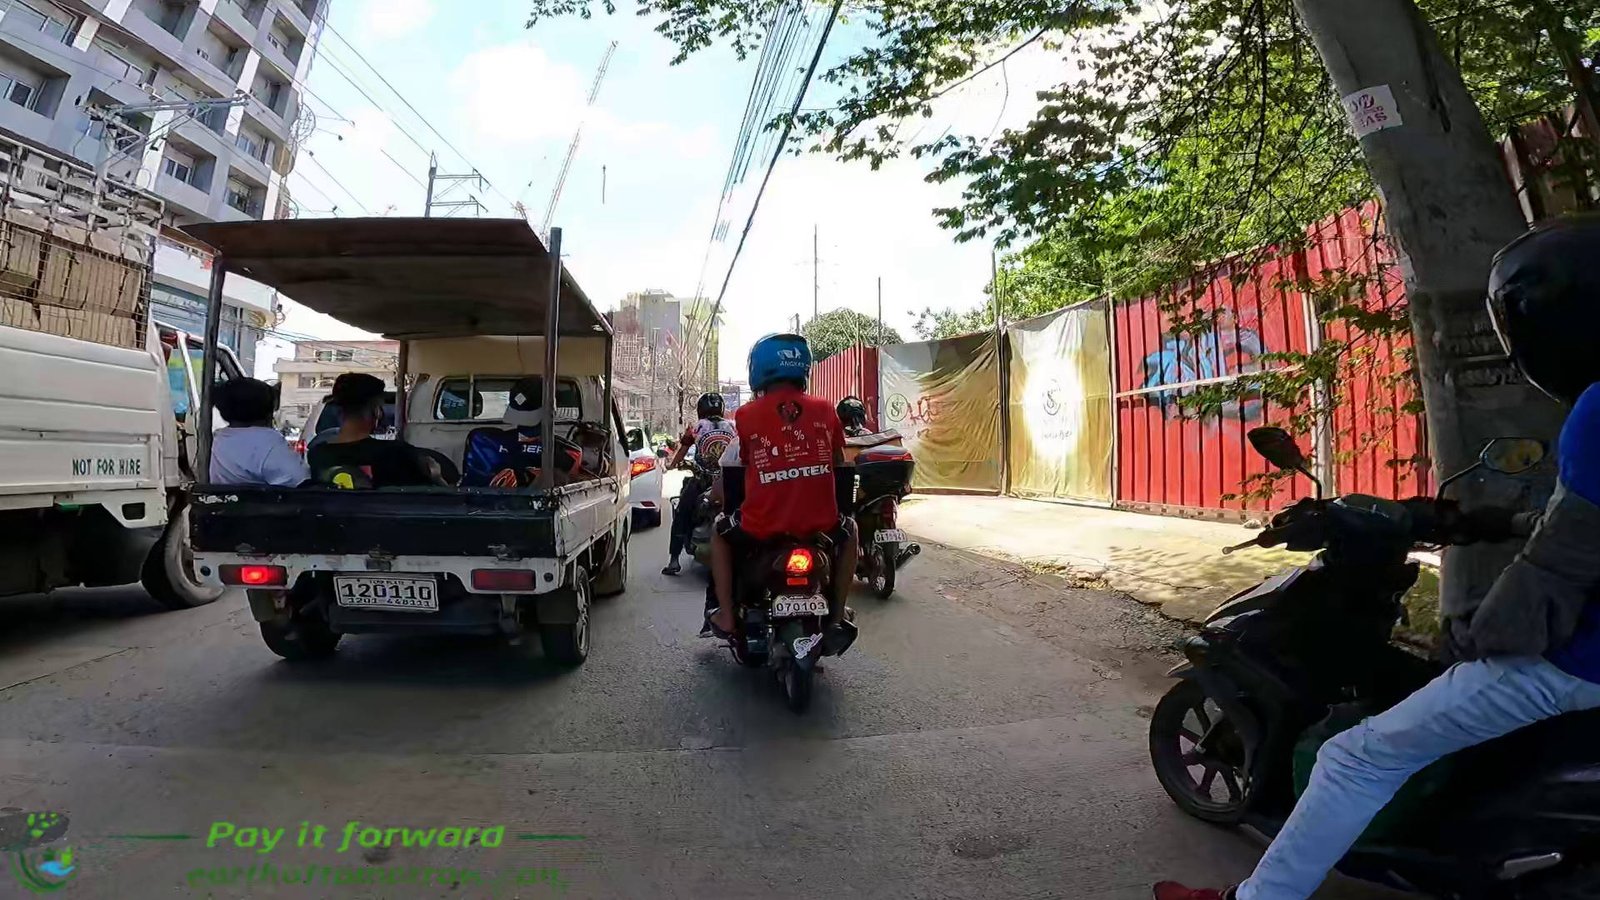 From One Oasis to Vicente Sotto hospital on a motorcycle